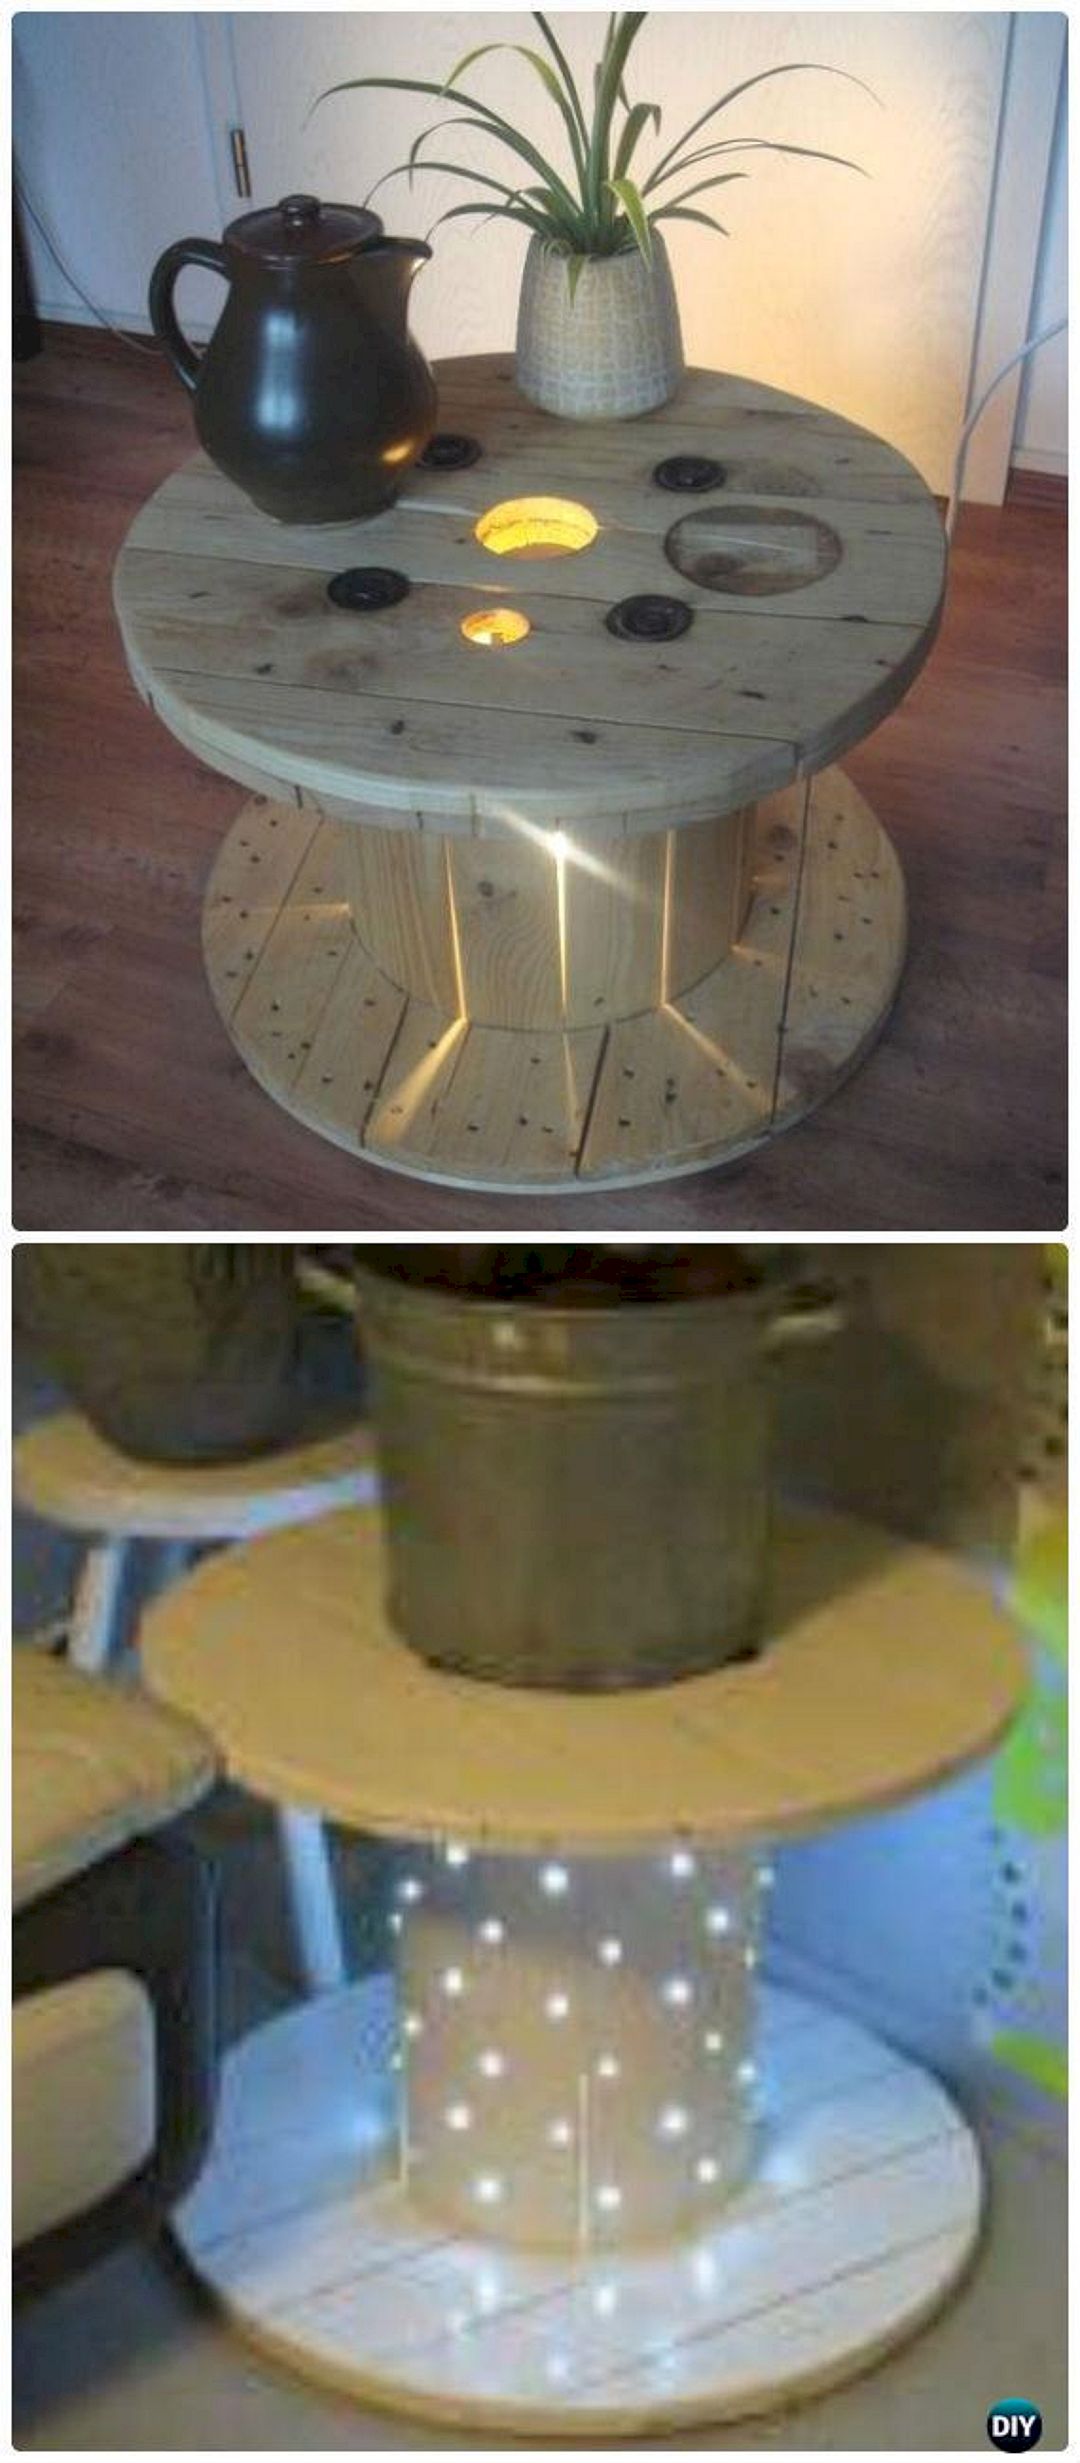 Marvelous Diy Recycled Wooden Spool Furniture Ideas For Your Home No 02